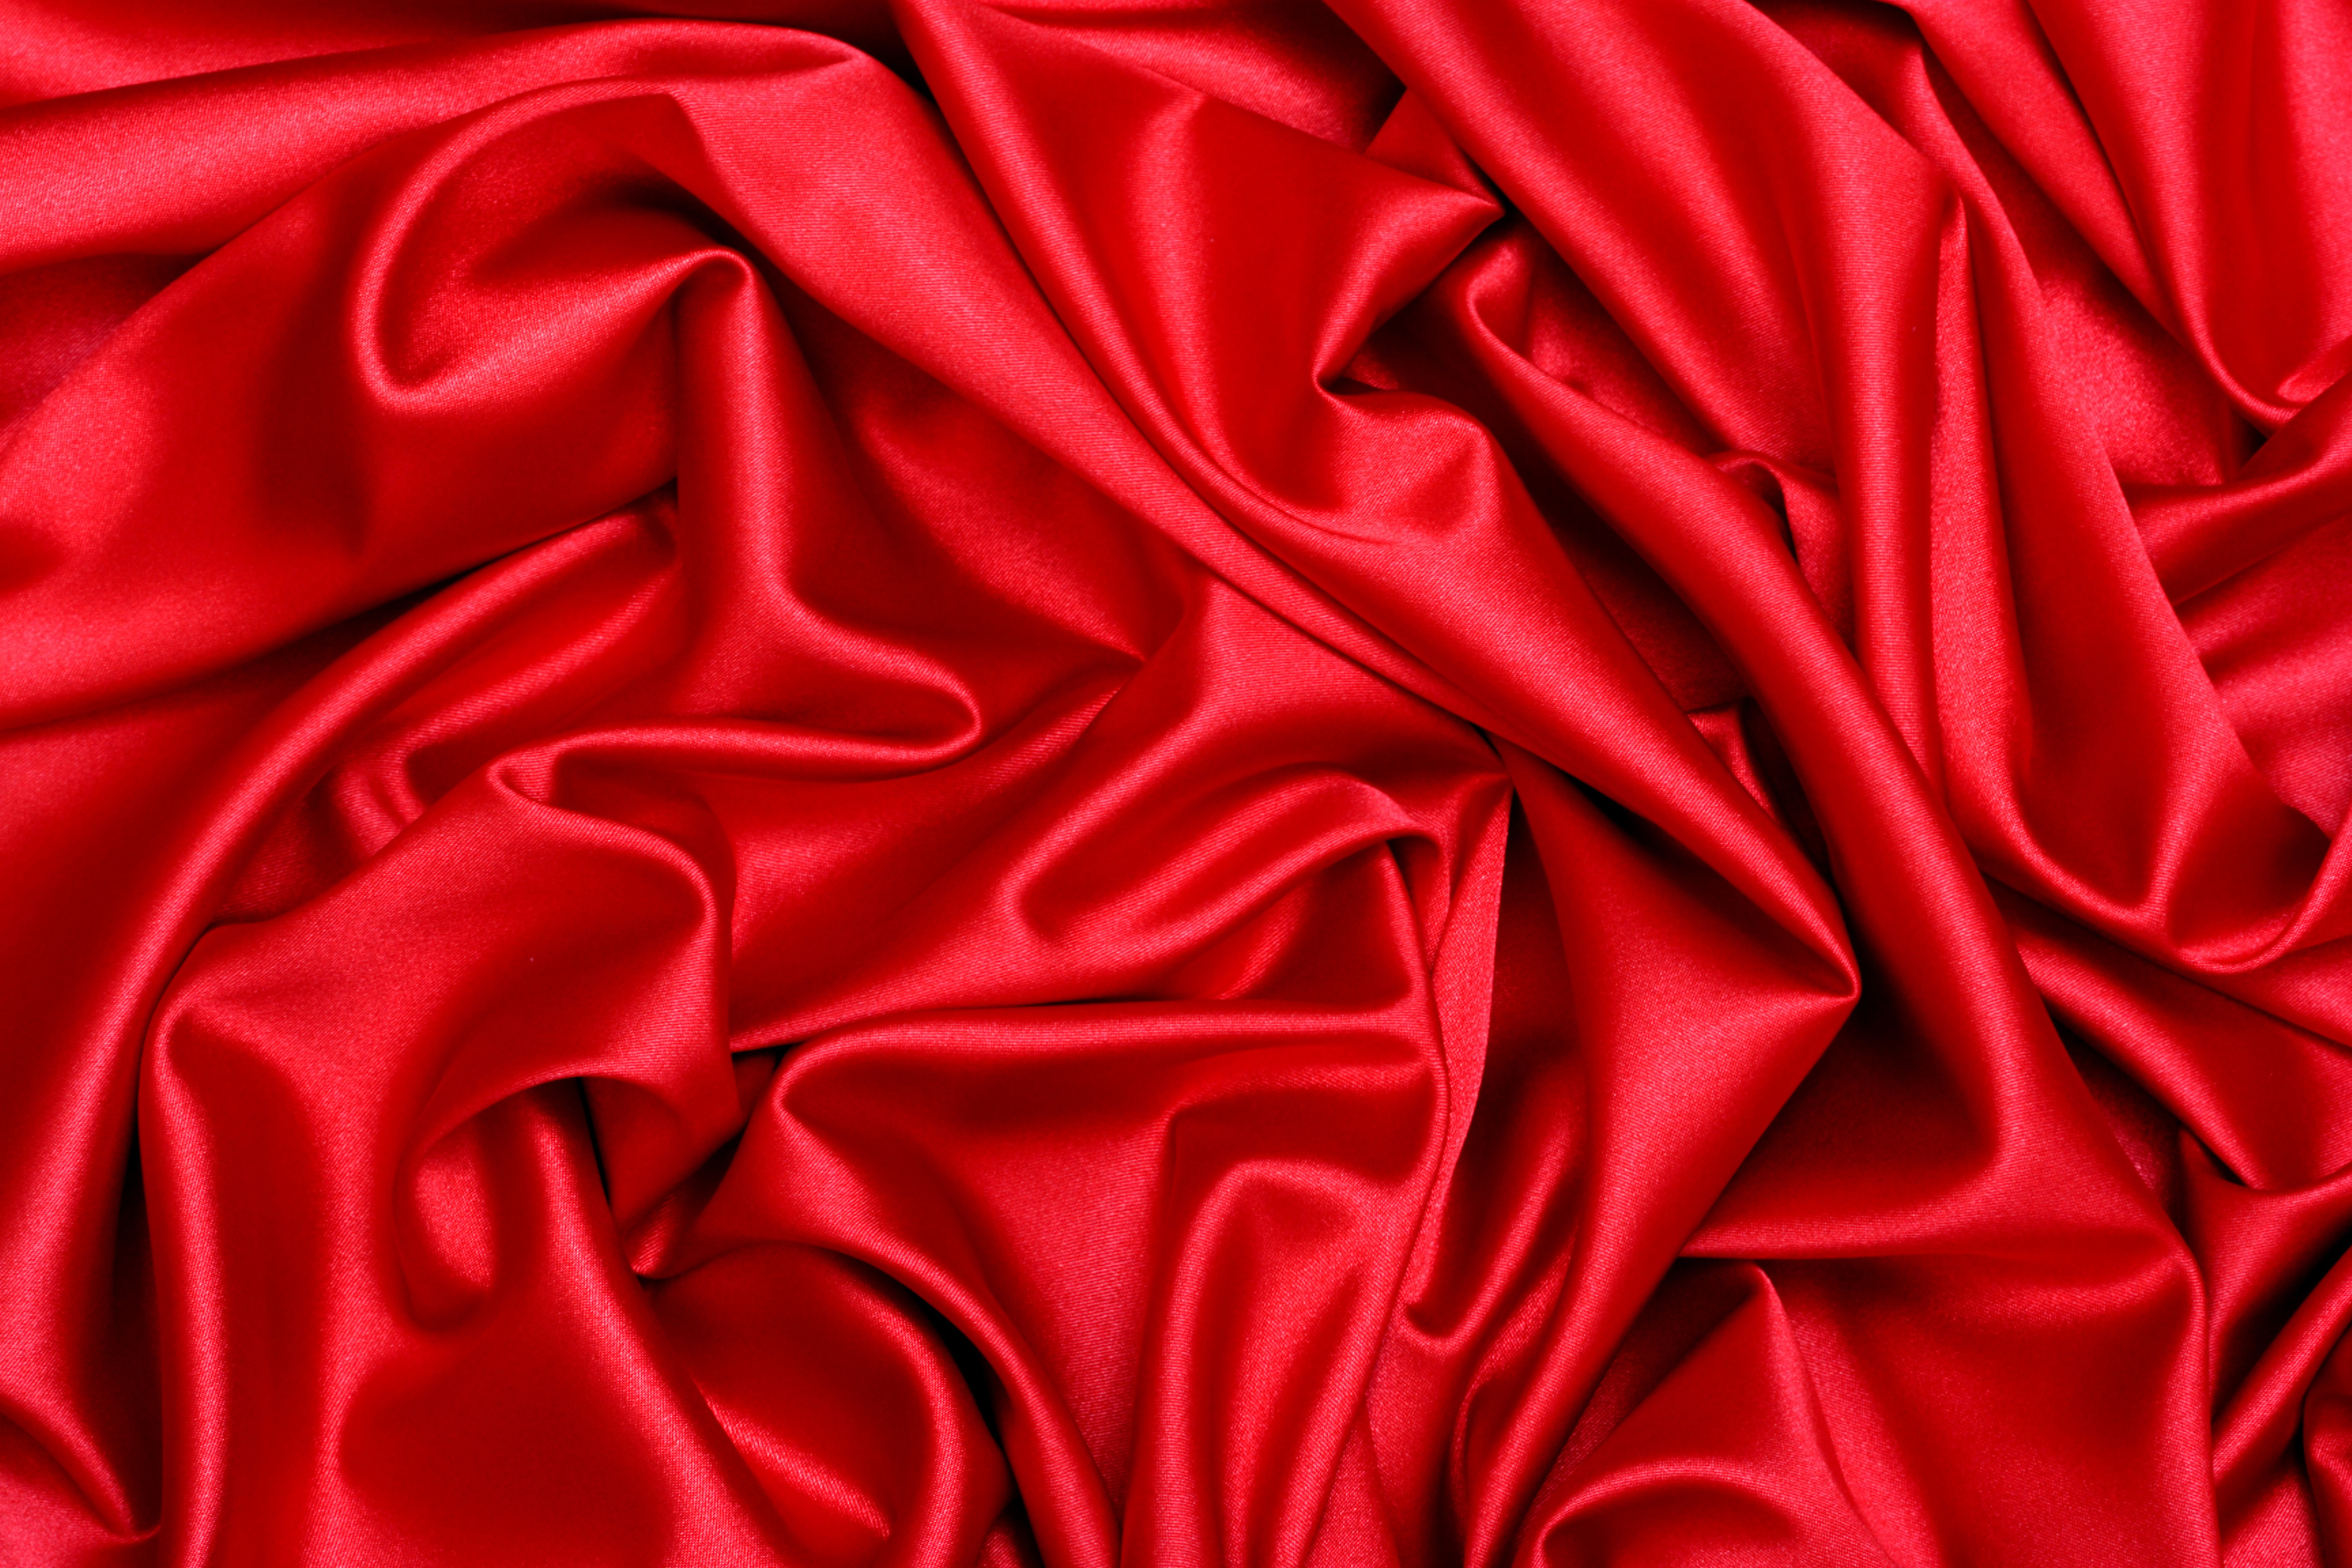 Red Fabric Cloth Silk Photo Background Texture Satin